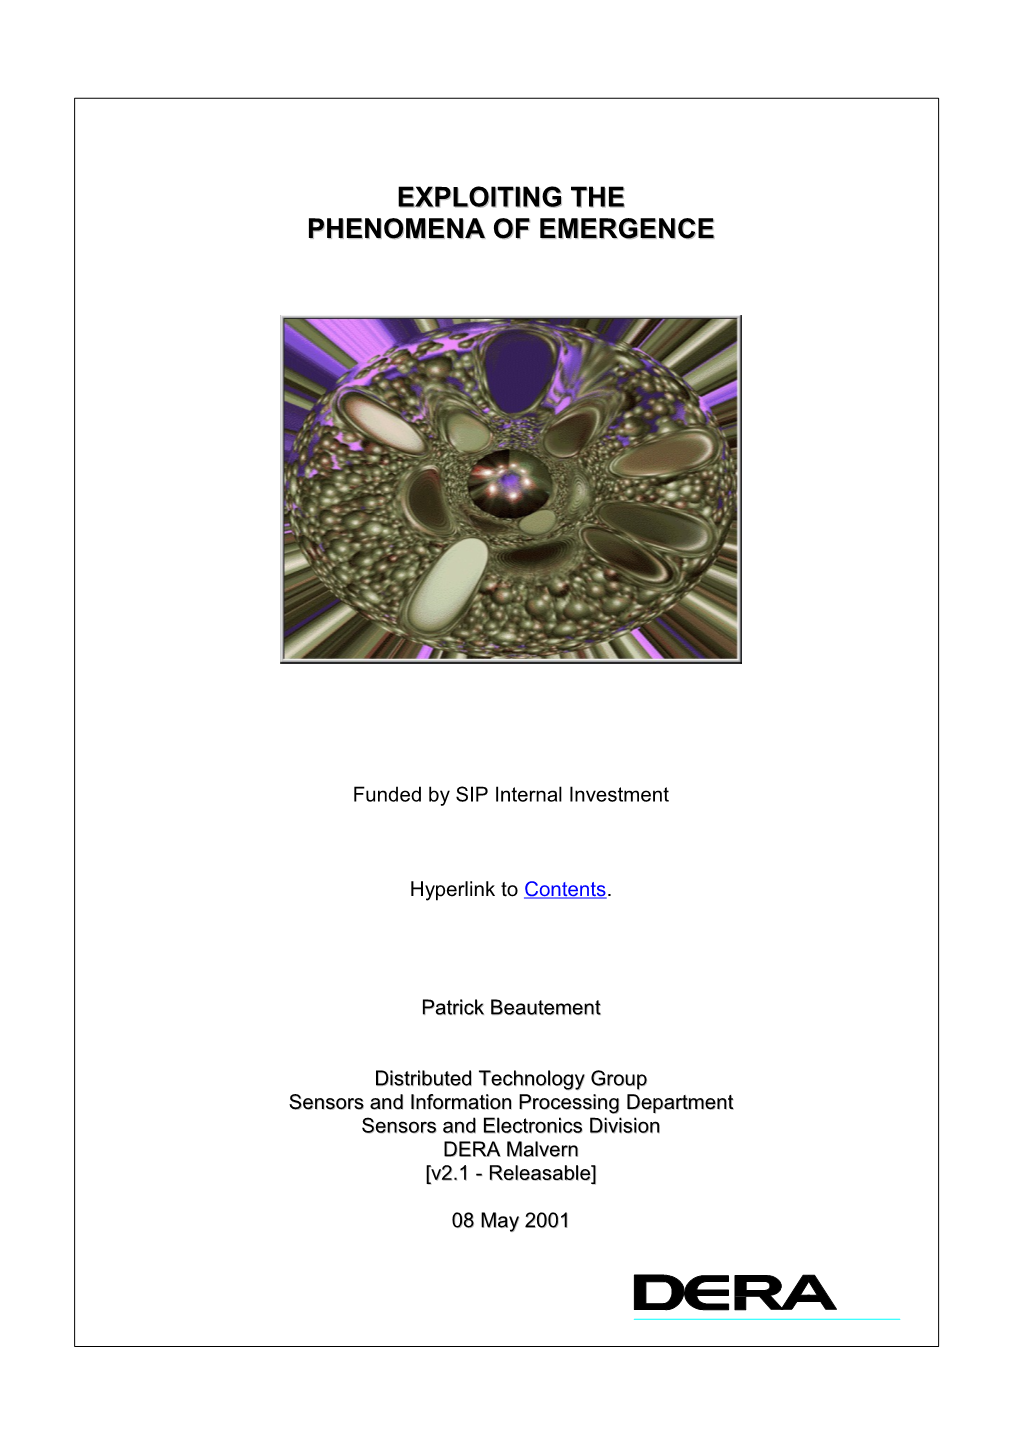 Initial Report on the Phenomena of Emergence